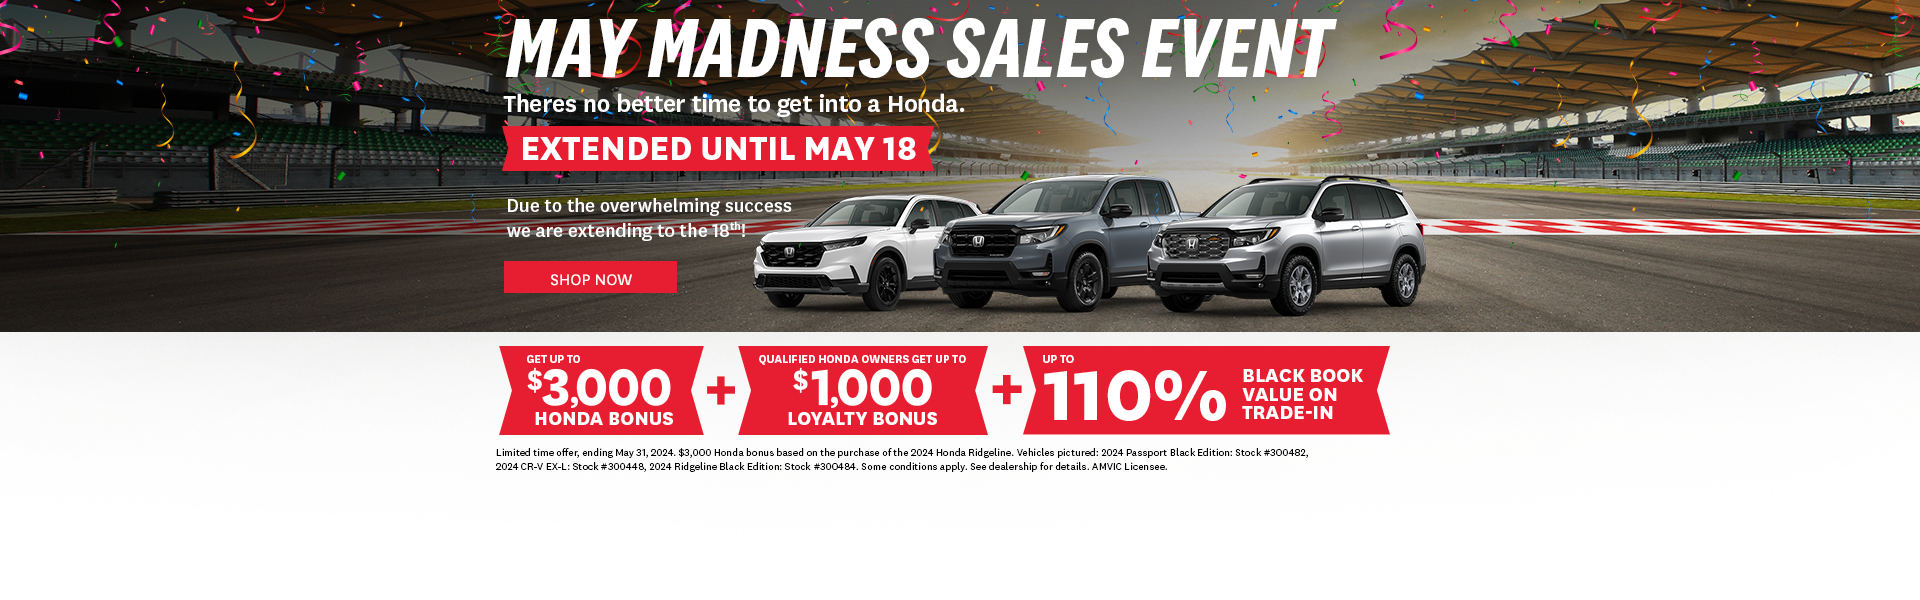 May Madness Sales Event - Extended